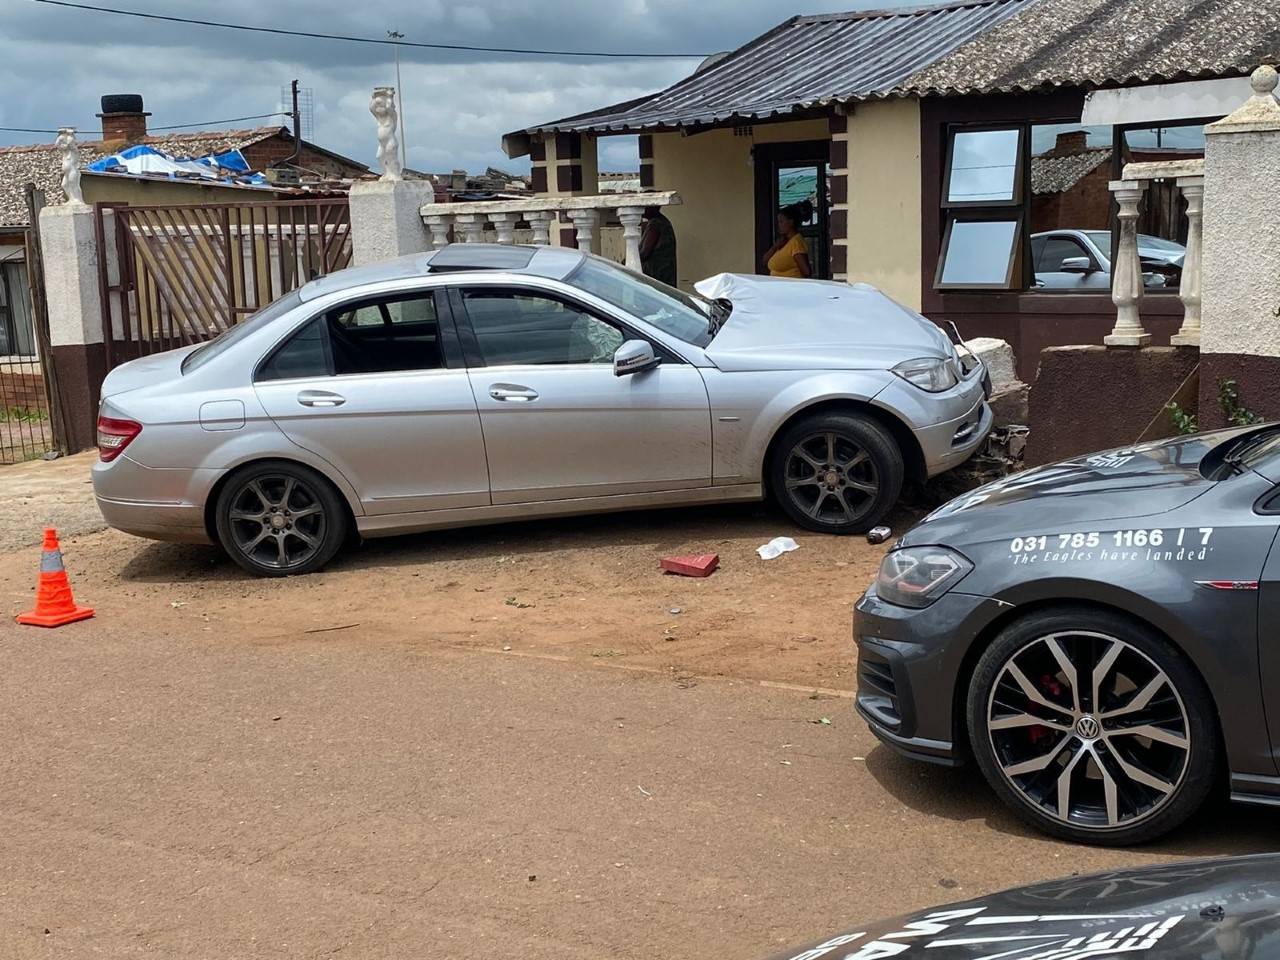 A car which crashed into a wall while attempting to stop one of the suspect who was escaping on foot in Sobantu following a housebreaking in Northdale.